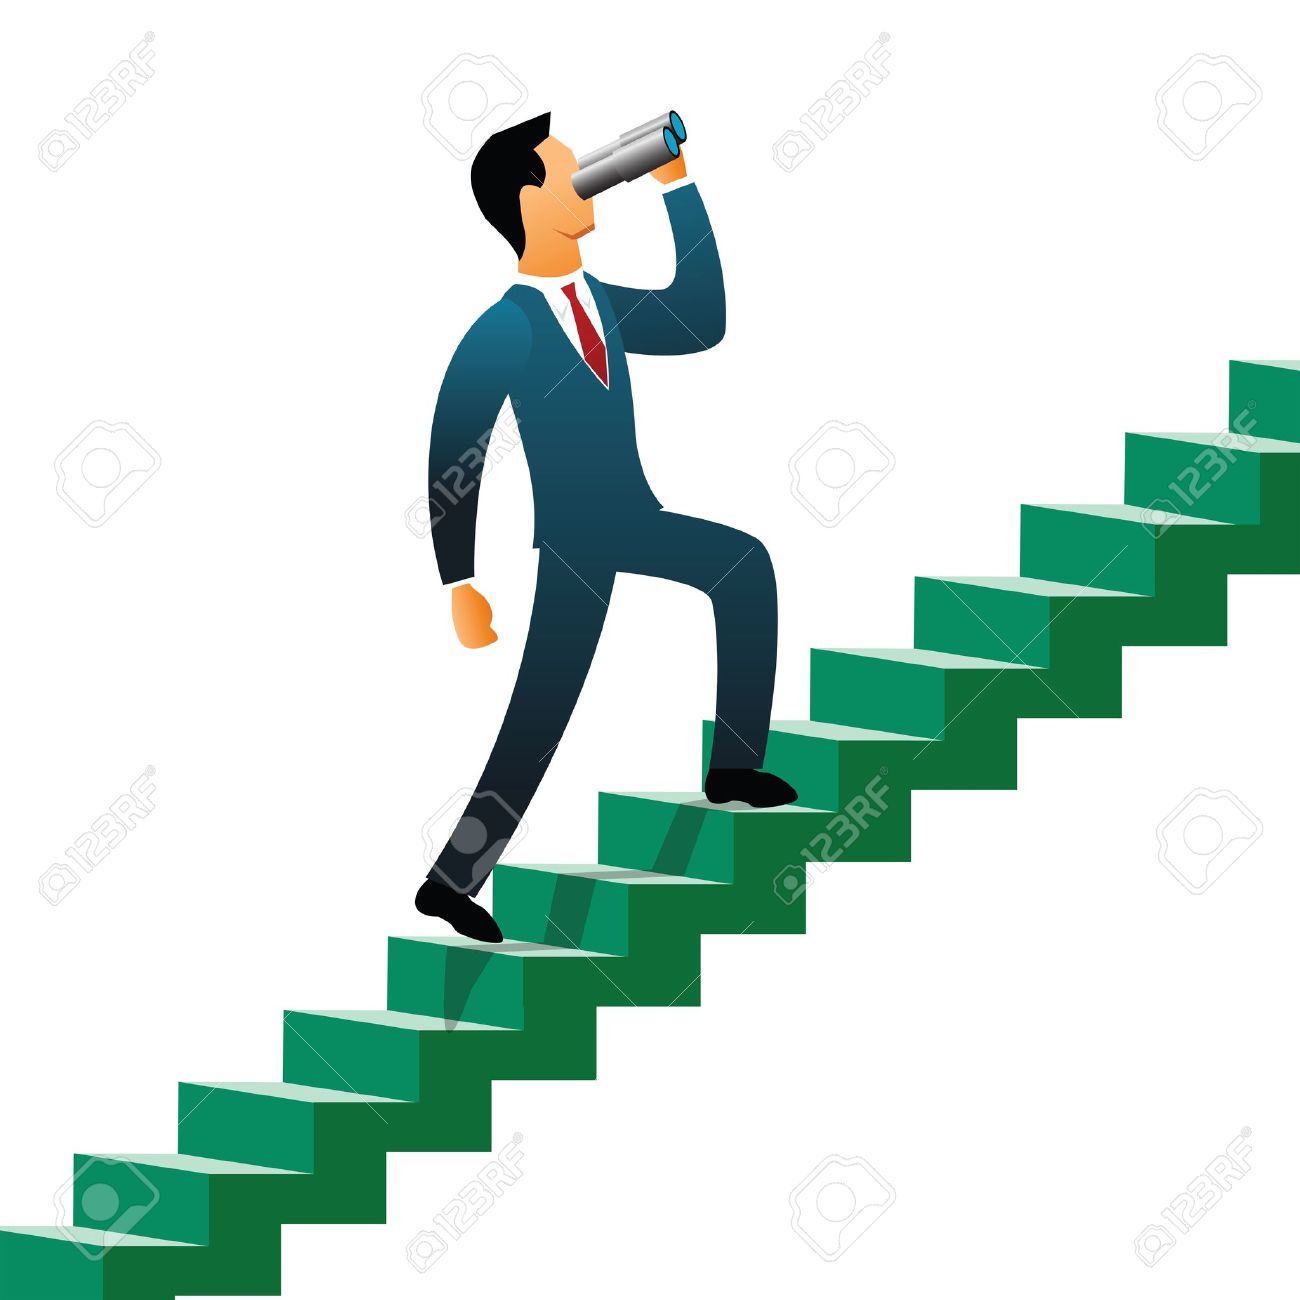 Man walking up stairs clipart.